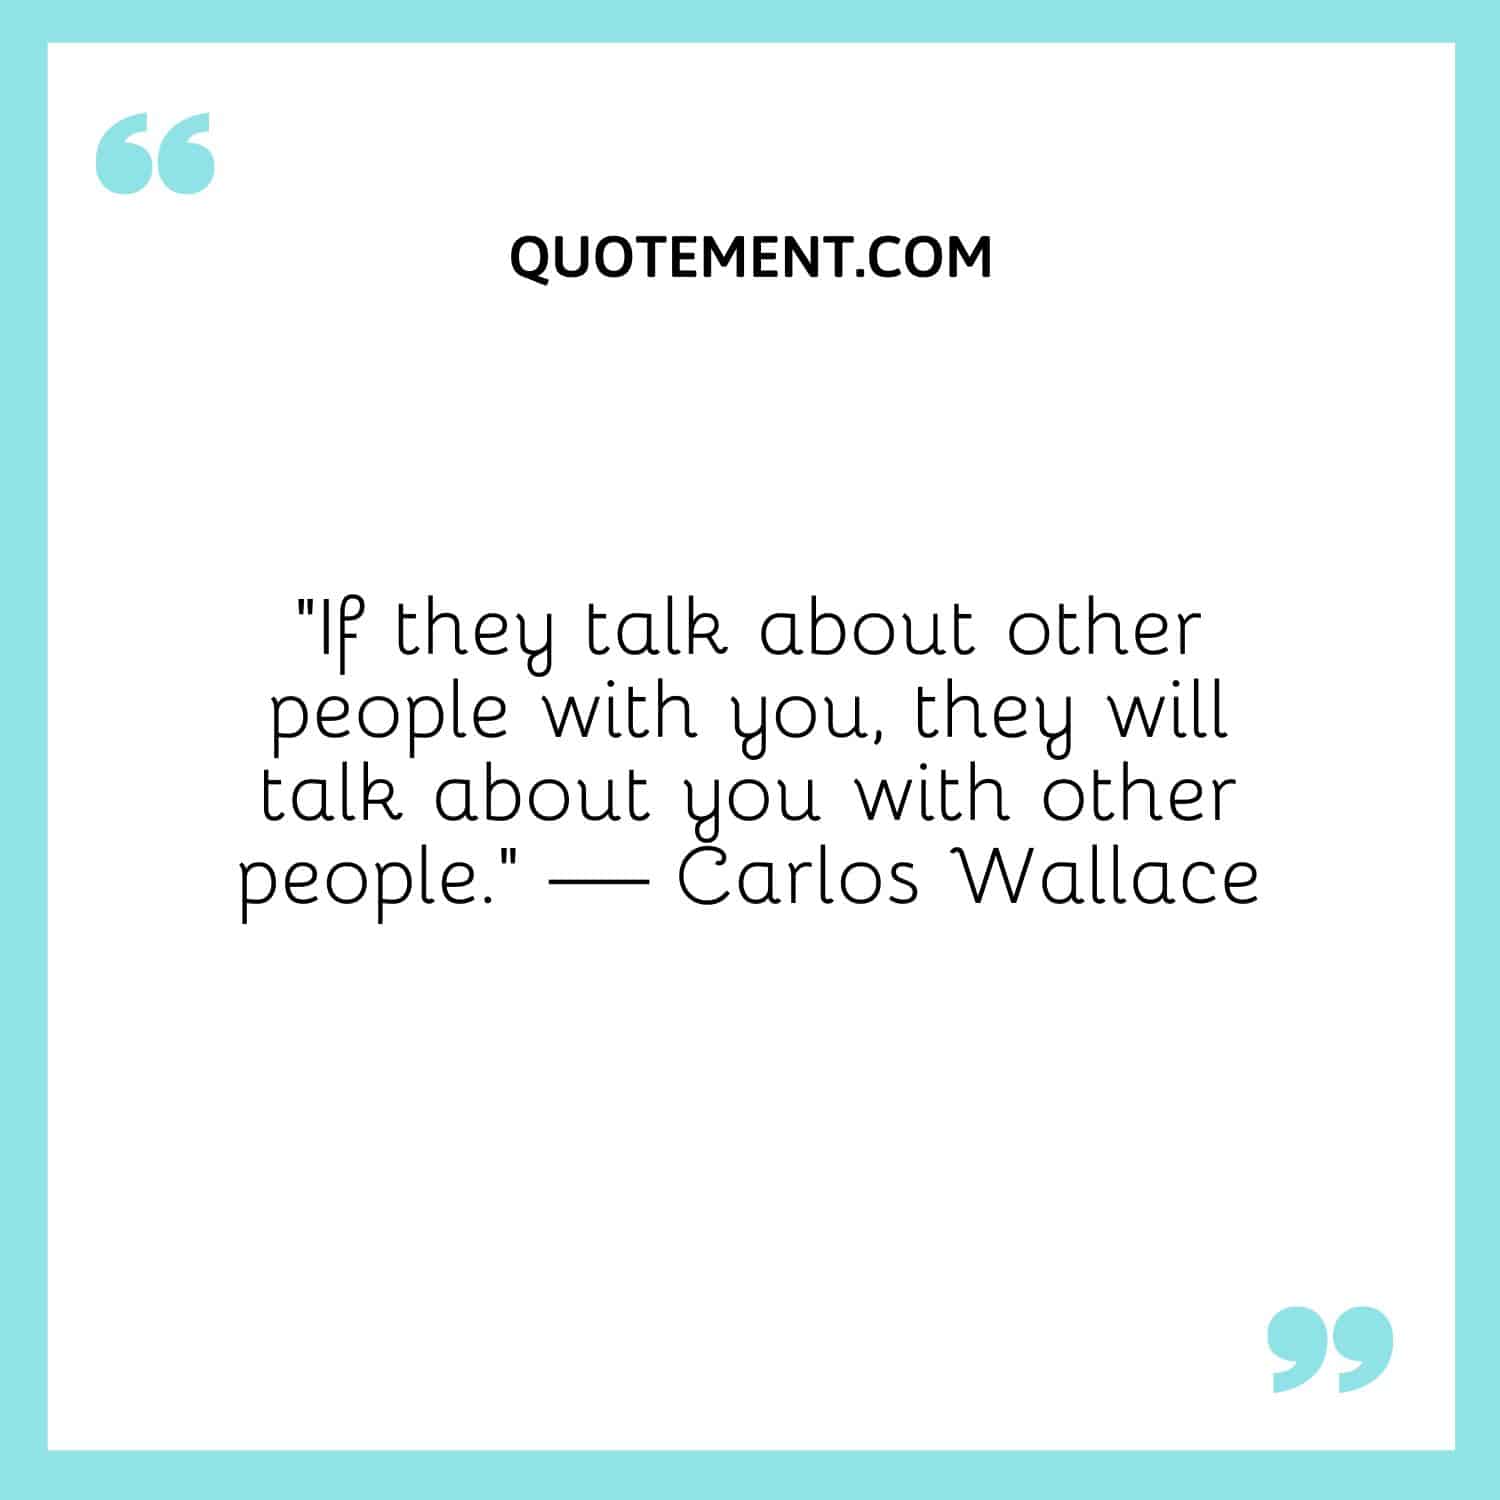 “If they talk about other people with you, they will talk about you with other people.” — Carlos Wallace